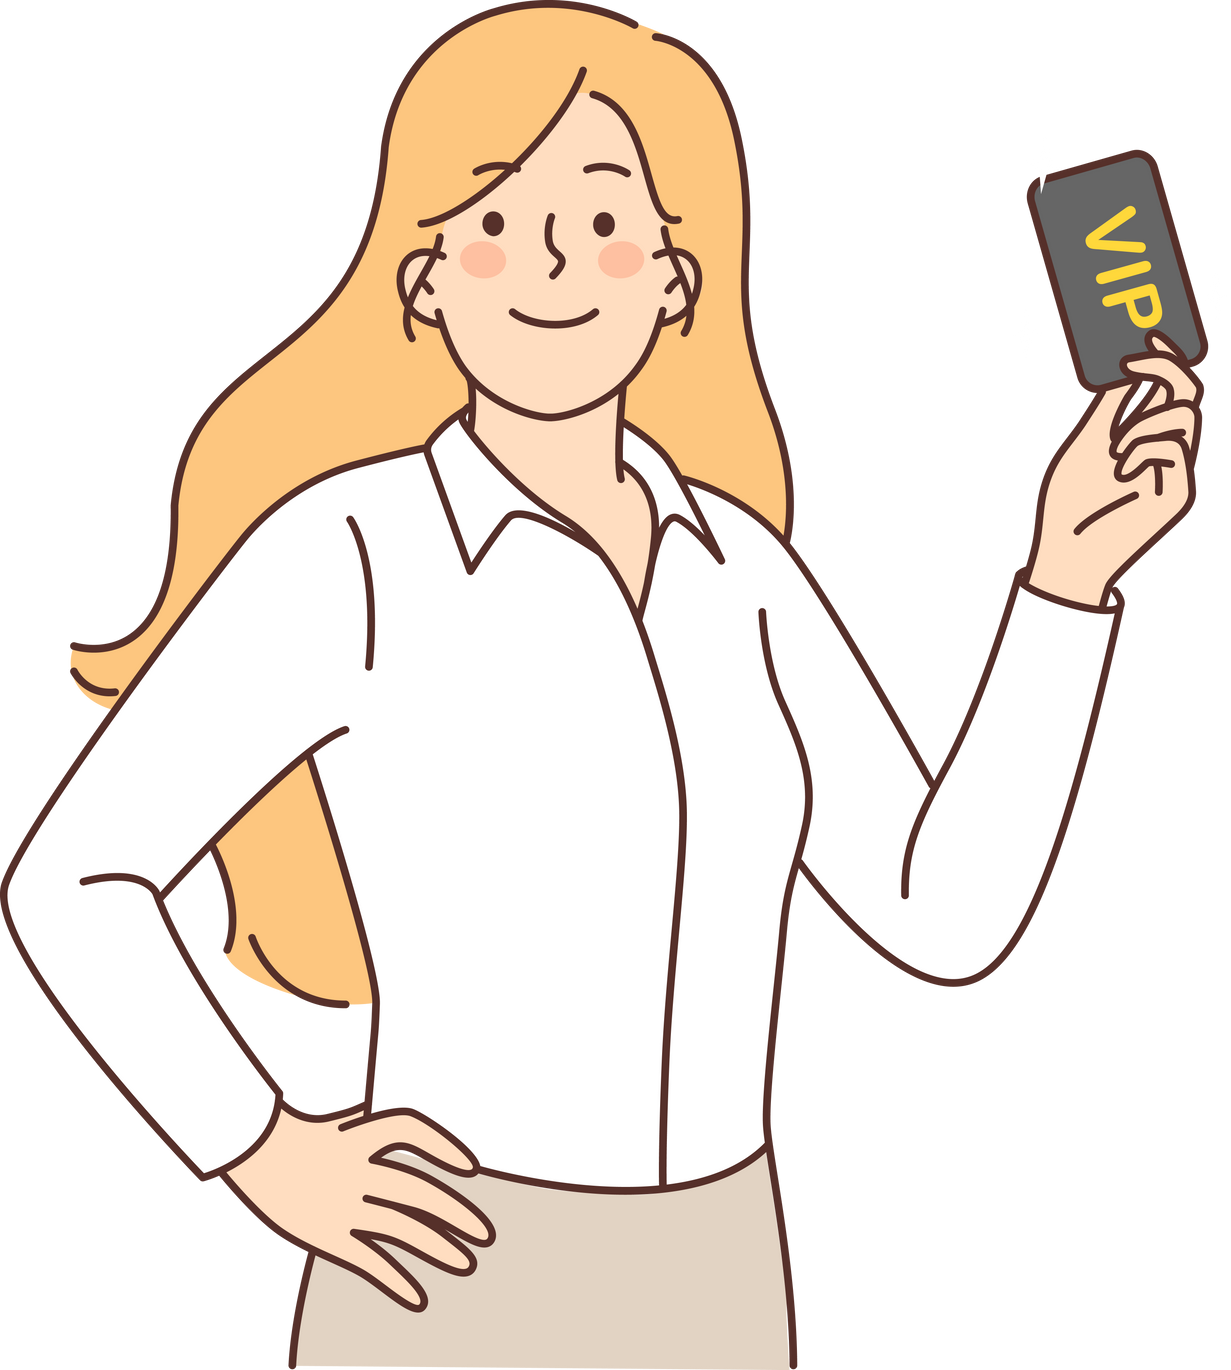 Woman holds vip card for access to private club of interest or party of people with premium status